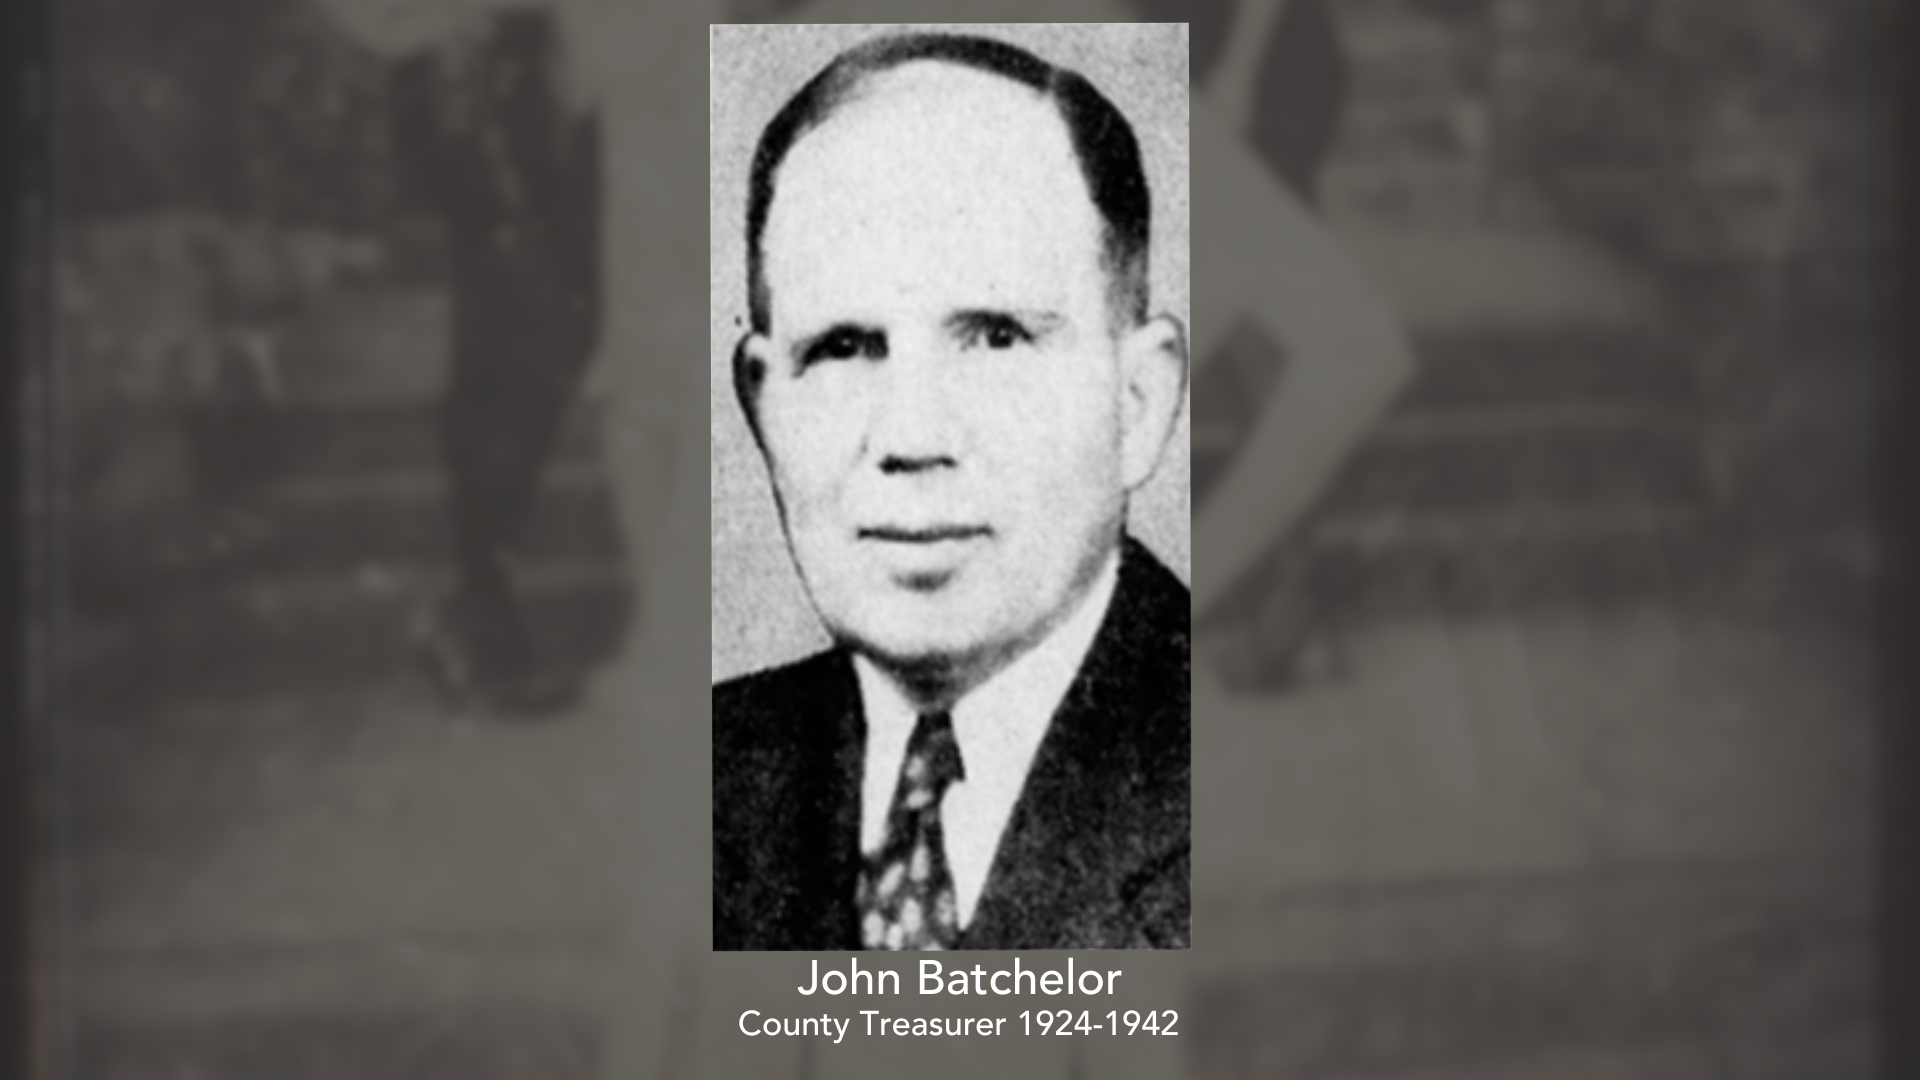 A black and white photo of John Batchelor, the county's treasurer from 1924-1942.